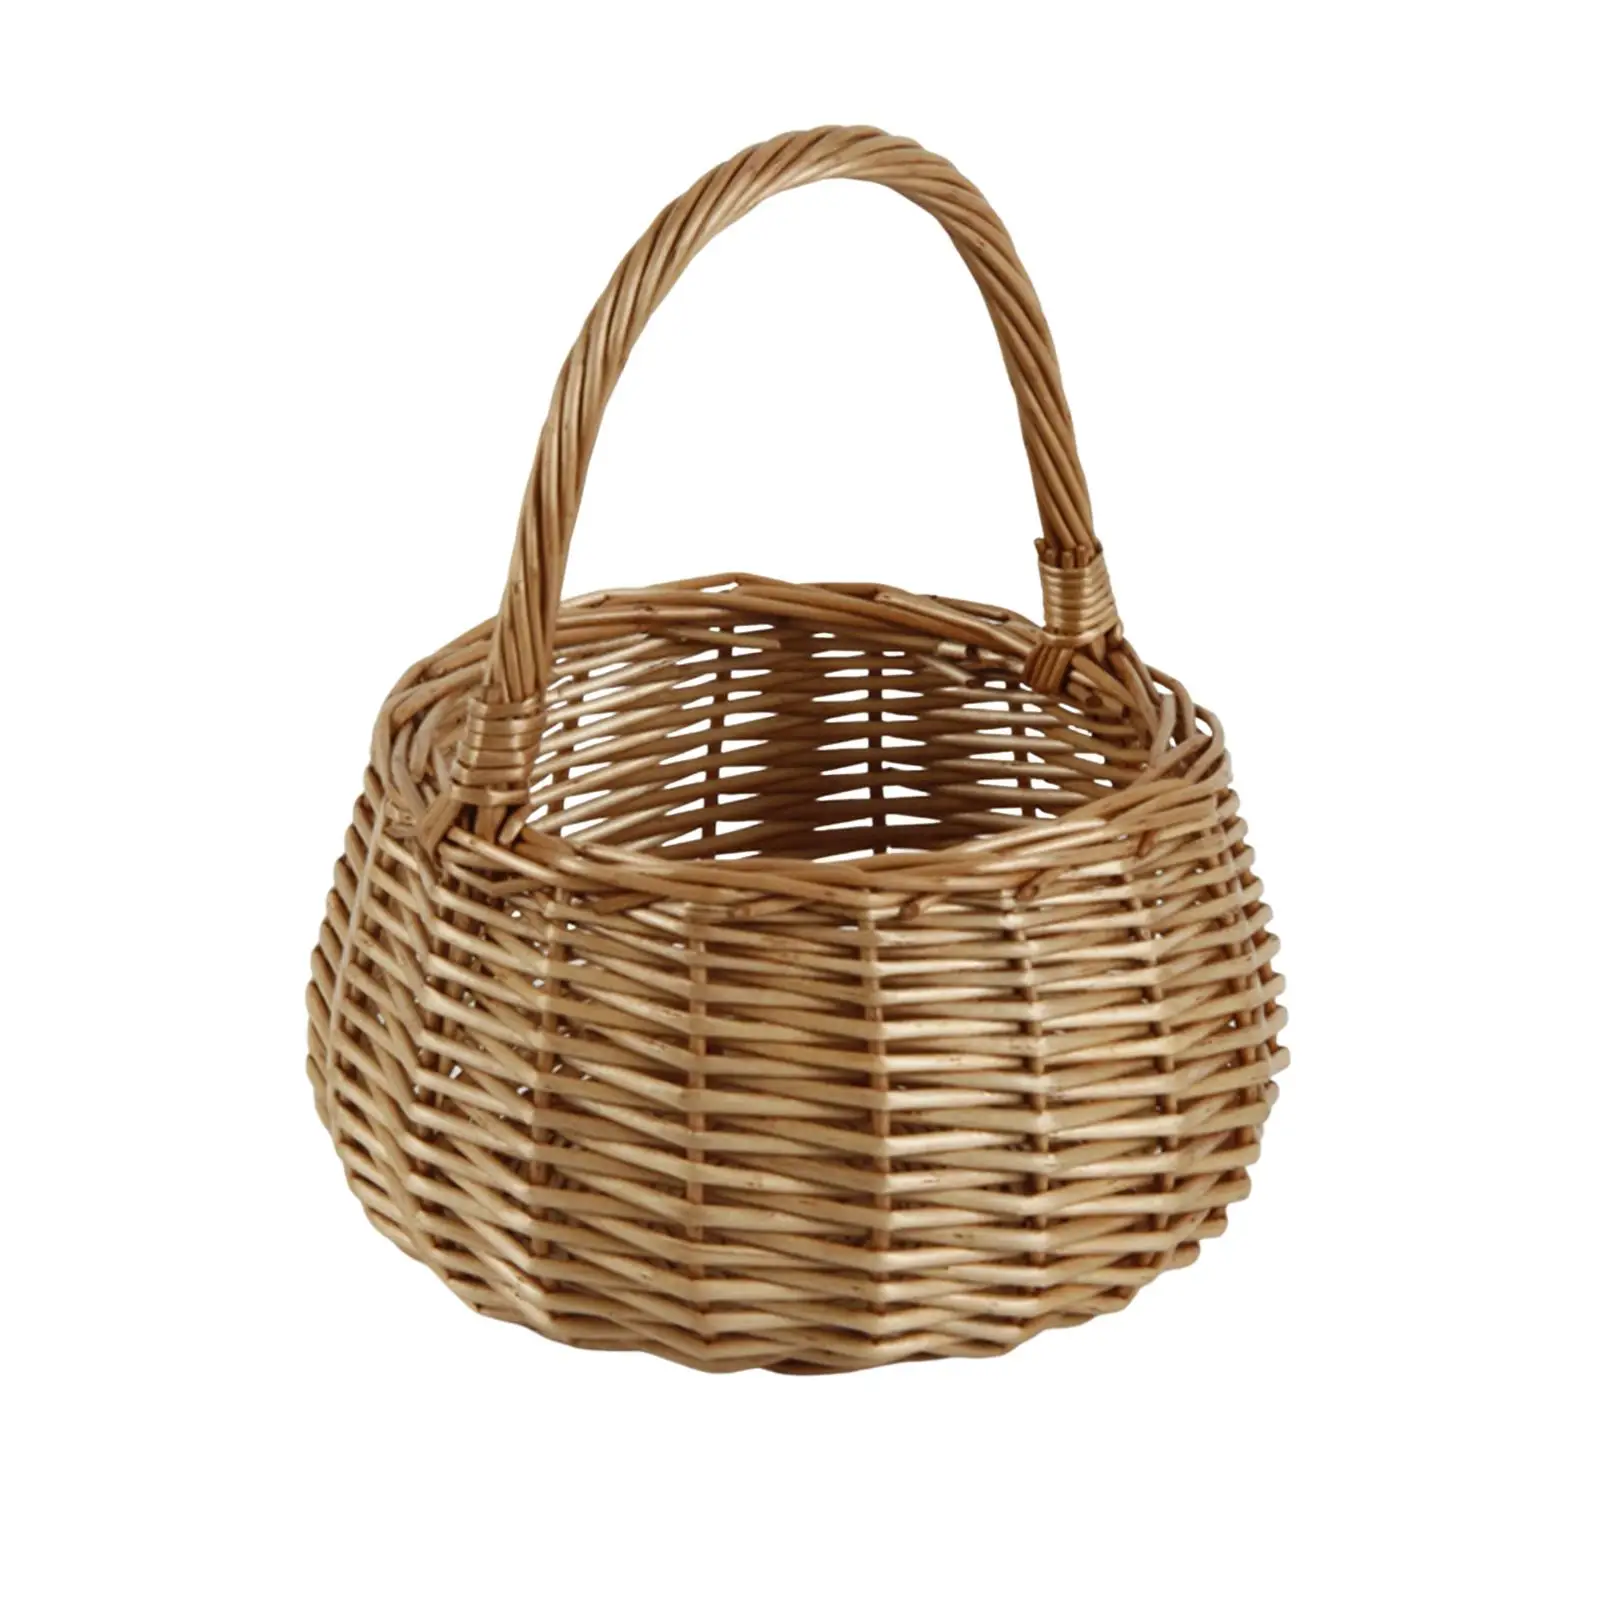 Wicker Storage Baskets Portable Crafts Shopping Basket Picking Basket Sturdy Hand Woven for Flower Bread Fruit Vegetable Picnic